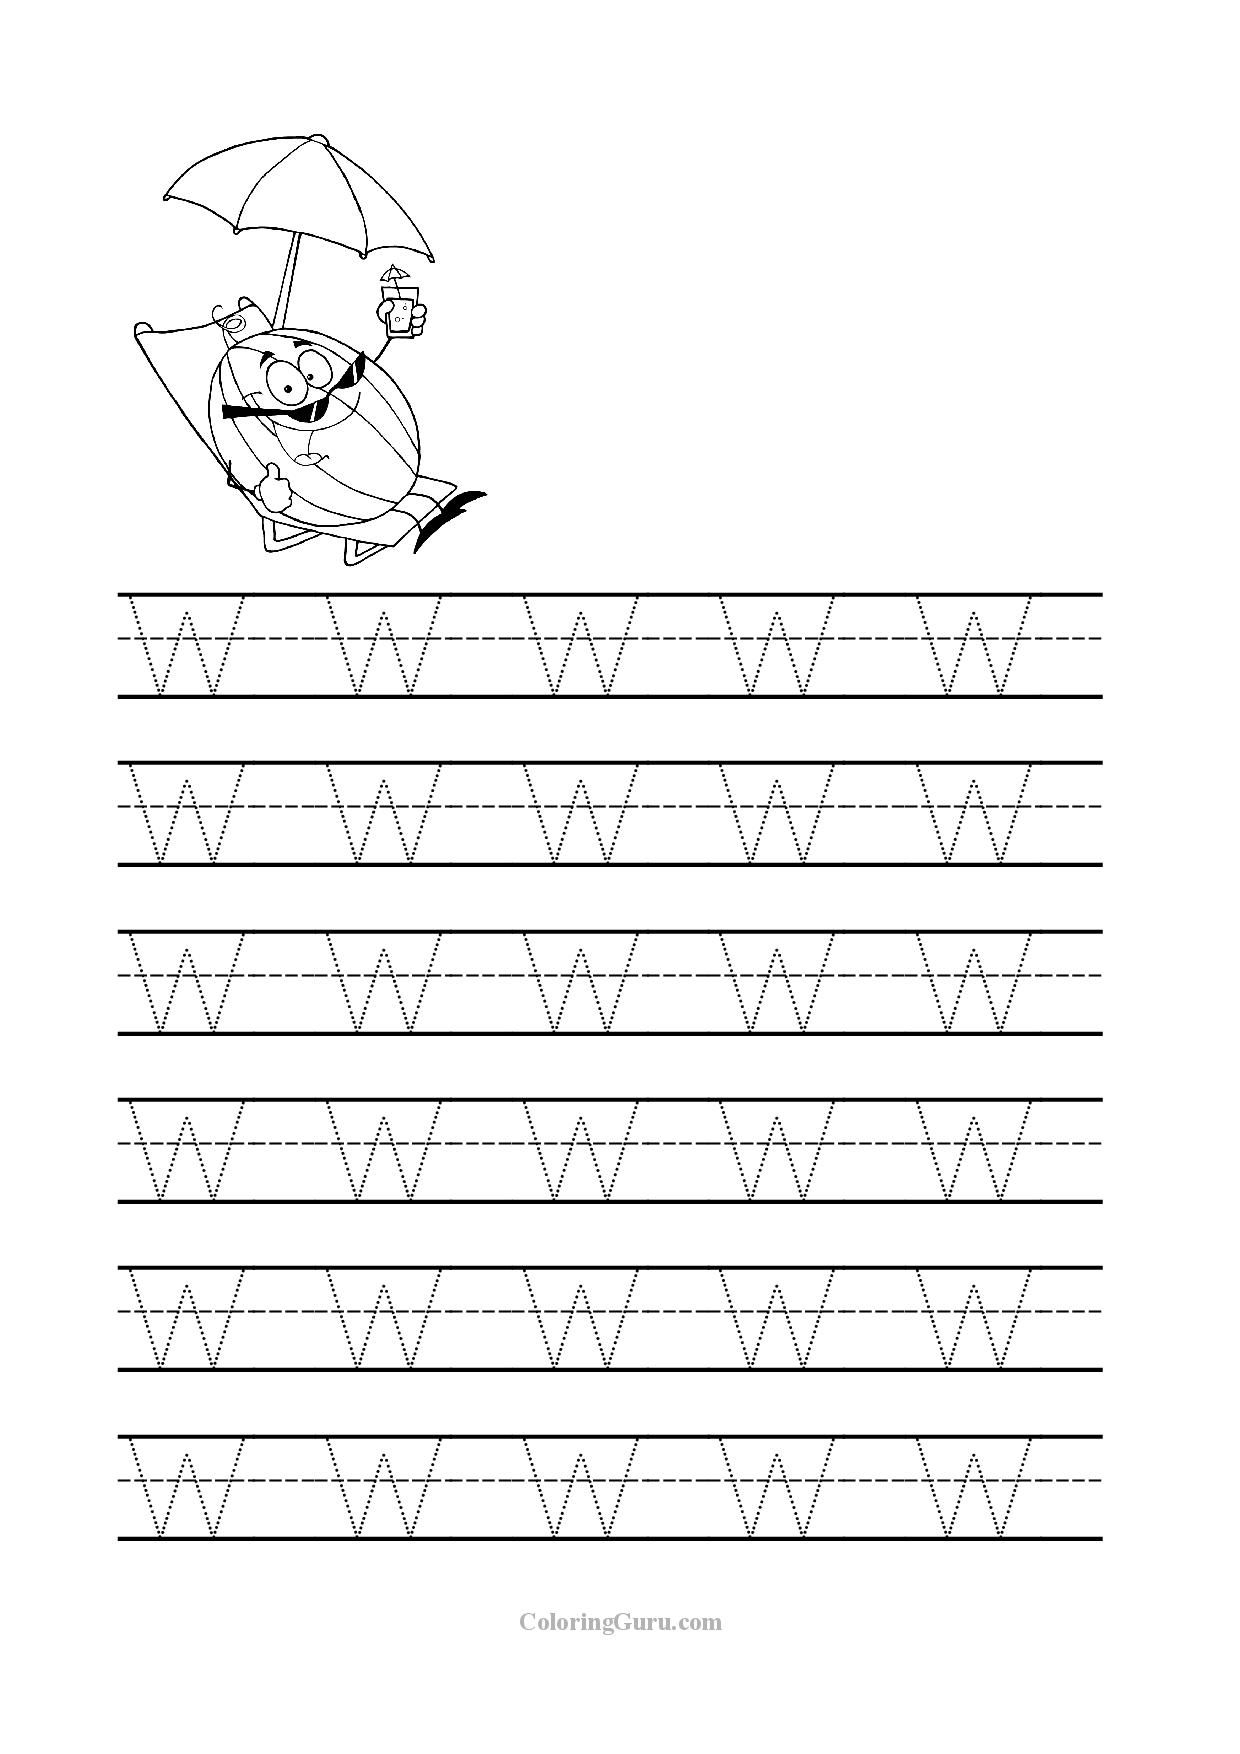 Free Printable Tracing Letter W Worksheets For Preschool intended for W Letter Tracing